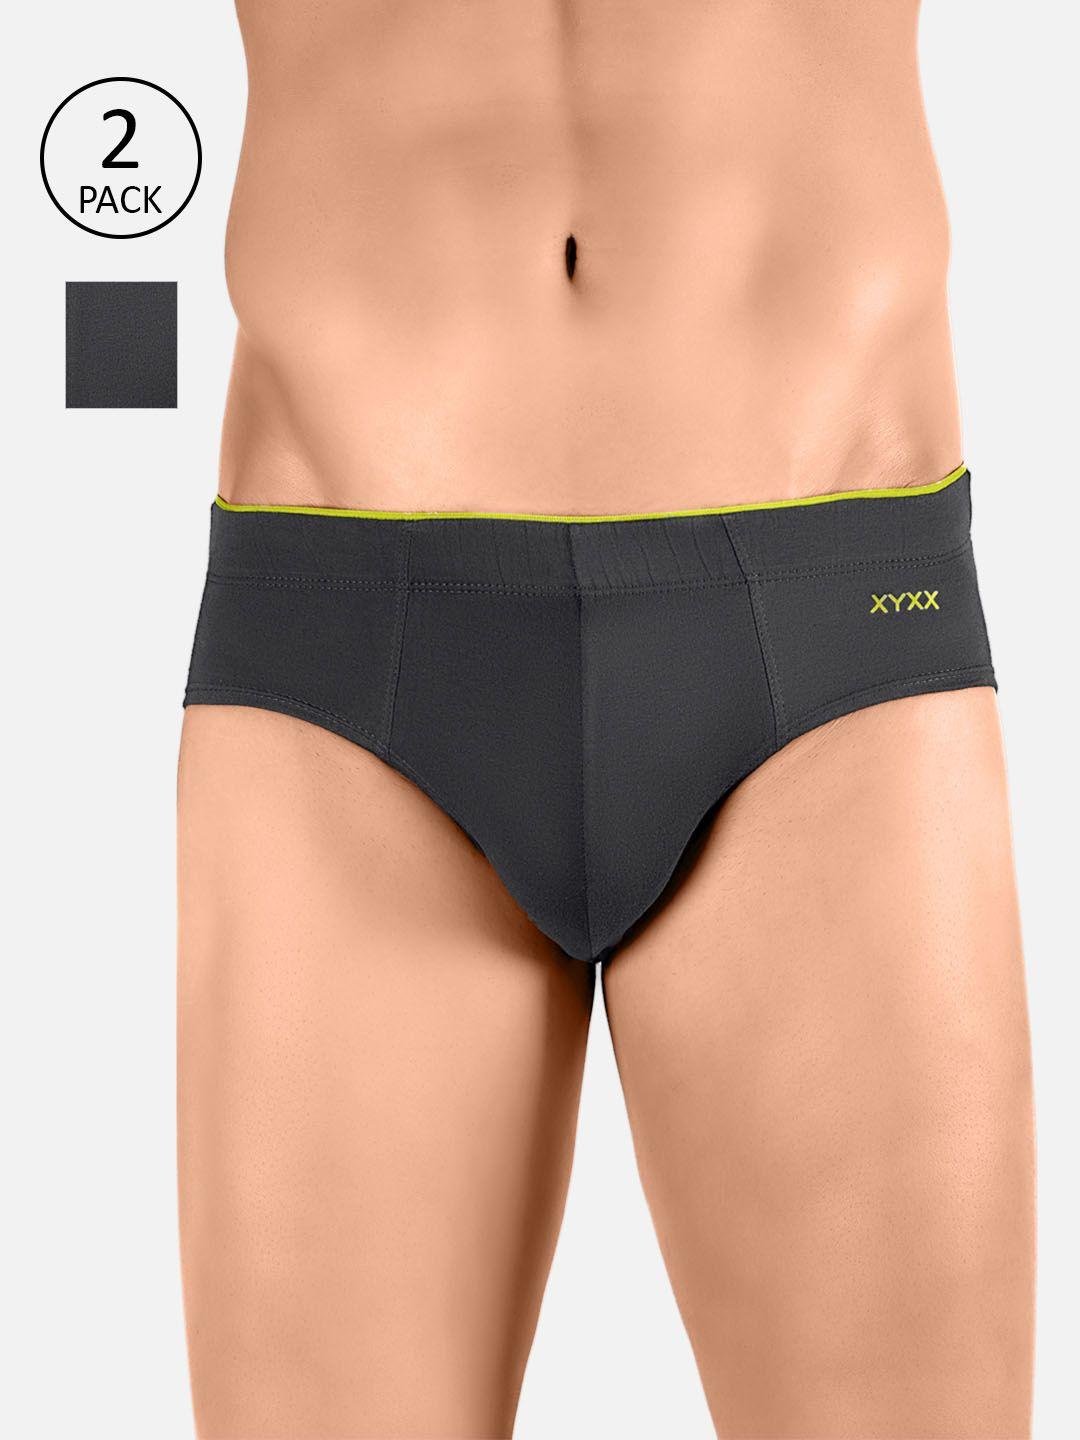 xyxx-men-intellisoft-antimicrobial-micro-modal-pack-of-2-uno-briefs-xybrf2pckn215